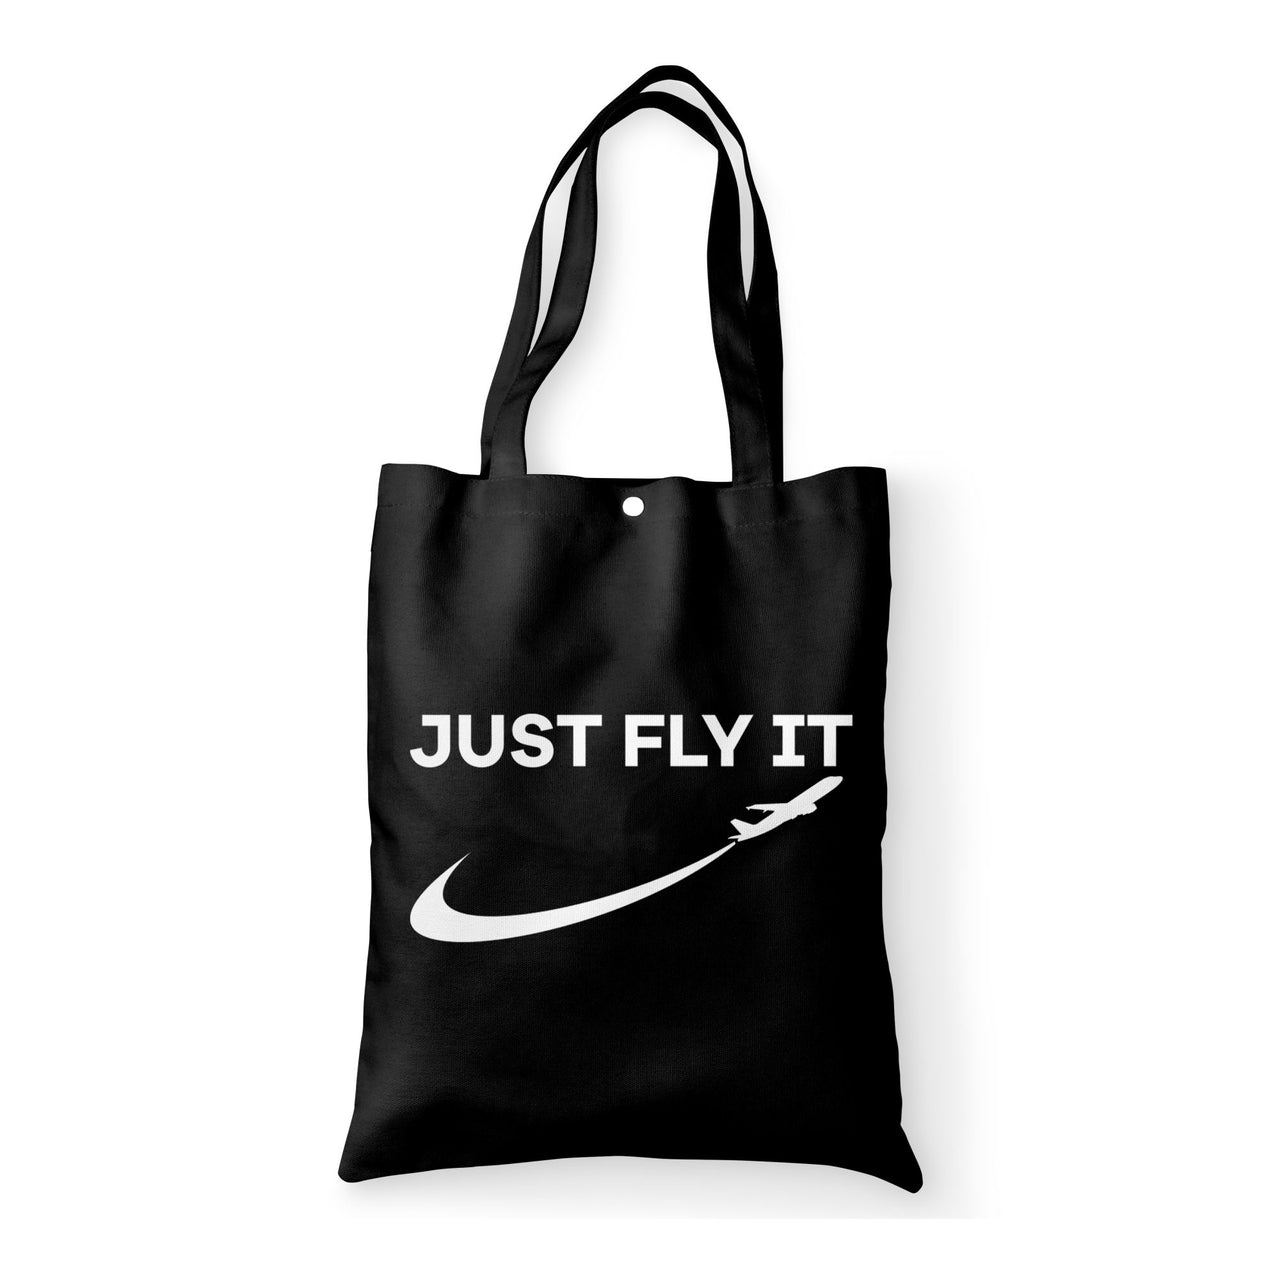 Just Fly It 2 Designed Tote Bags